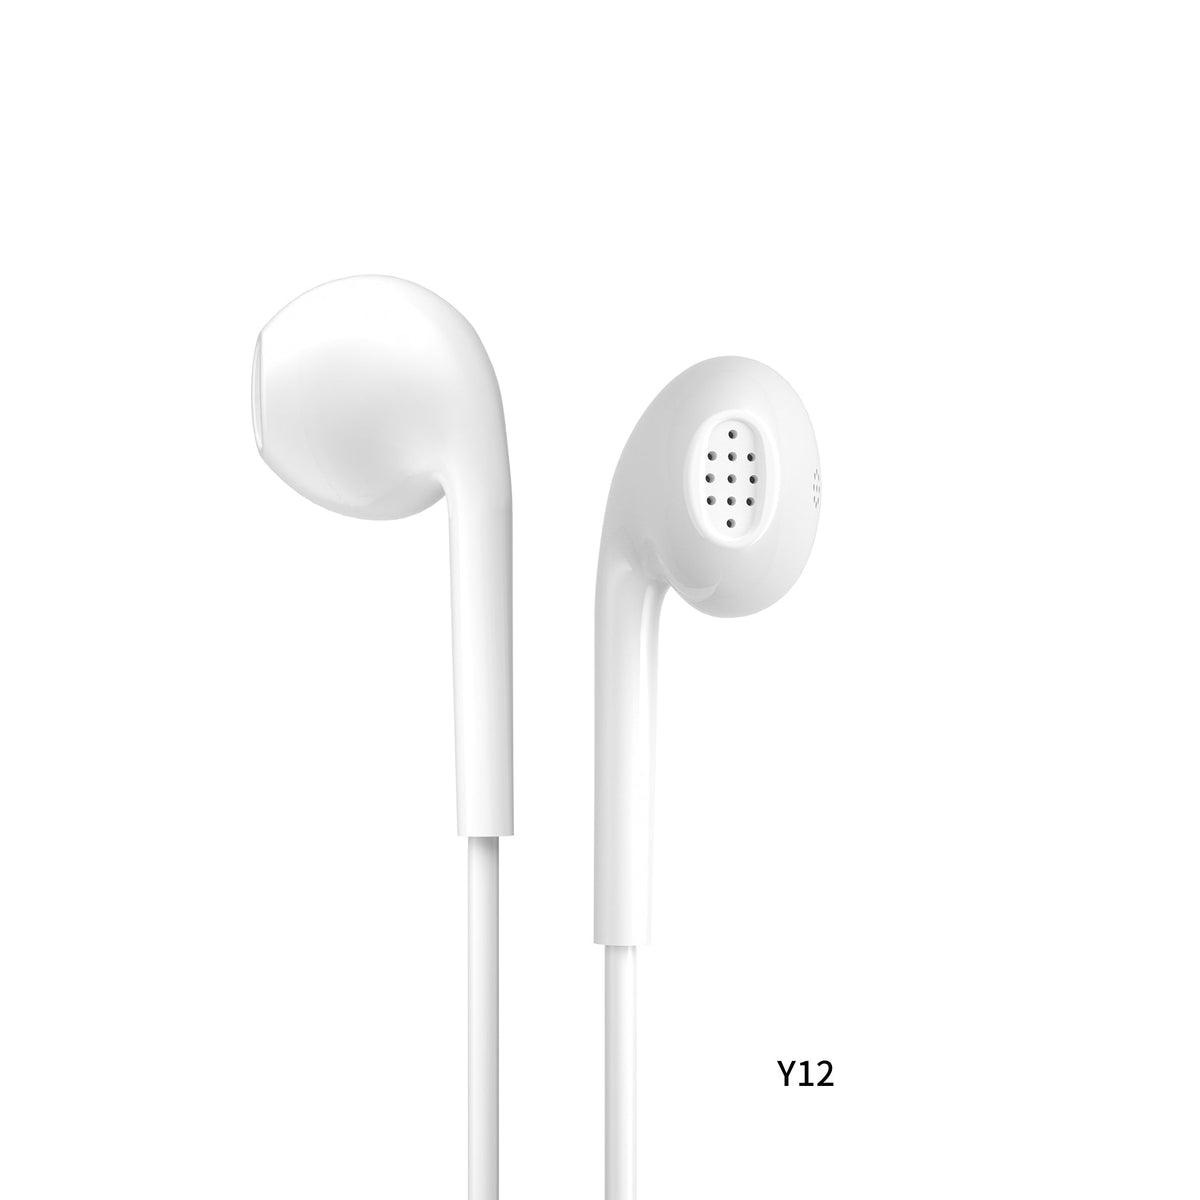 WK Y12Earphone , 3.5MM Wired Earphone , Budget wired earphone with mic , Hifi Stereo Sound Wired Headset , sport wired earphone , 3.5mm jack wired earphone , 3.5mm headset for mobile phone , universal 3.5mm jack wired earphone